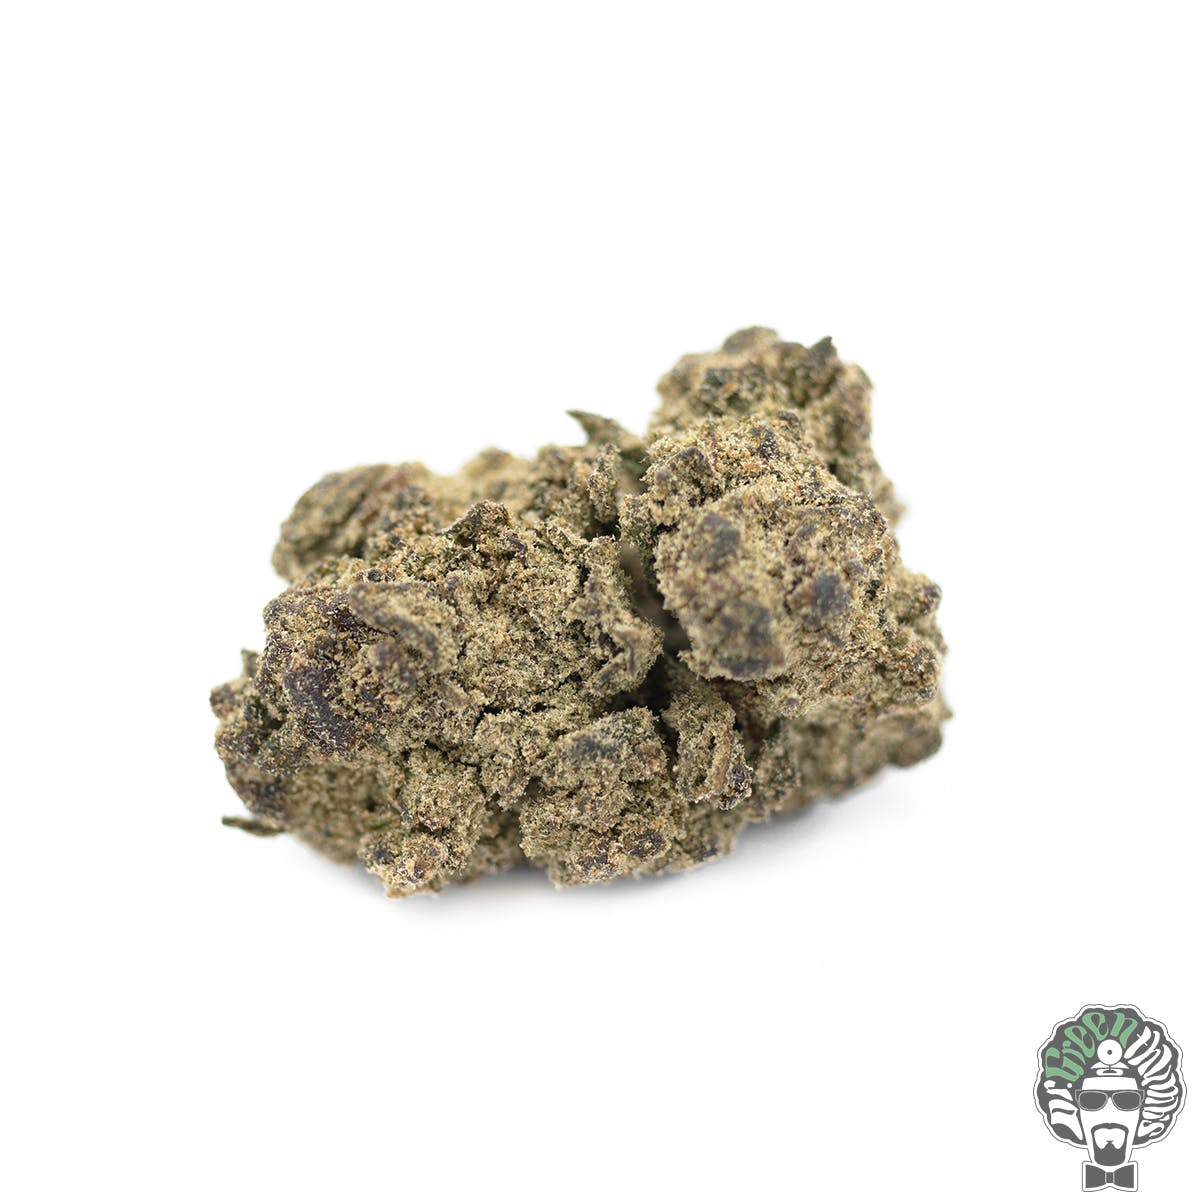 Jack Frost Moonrock Cannabis By Caviar Gold